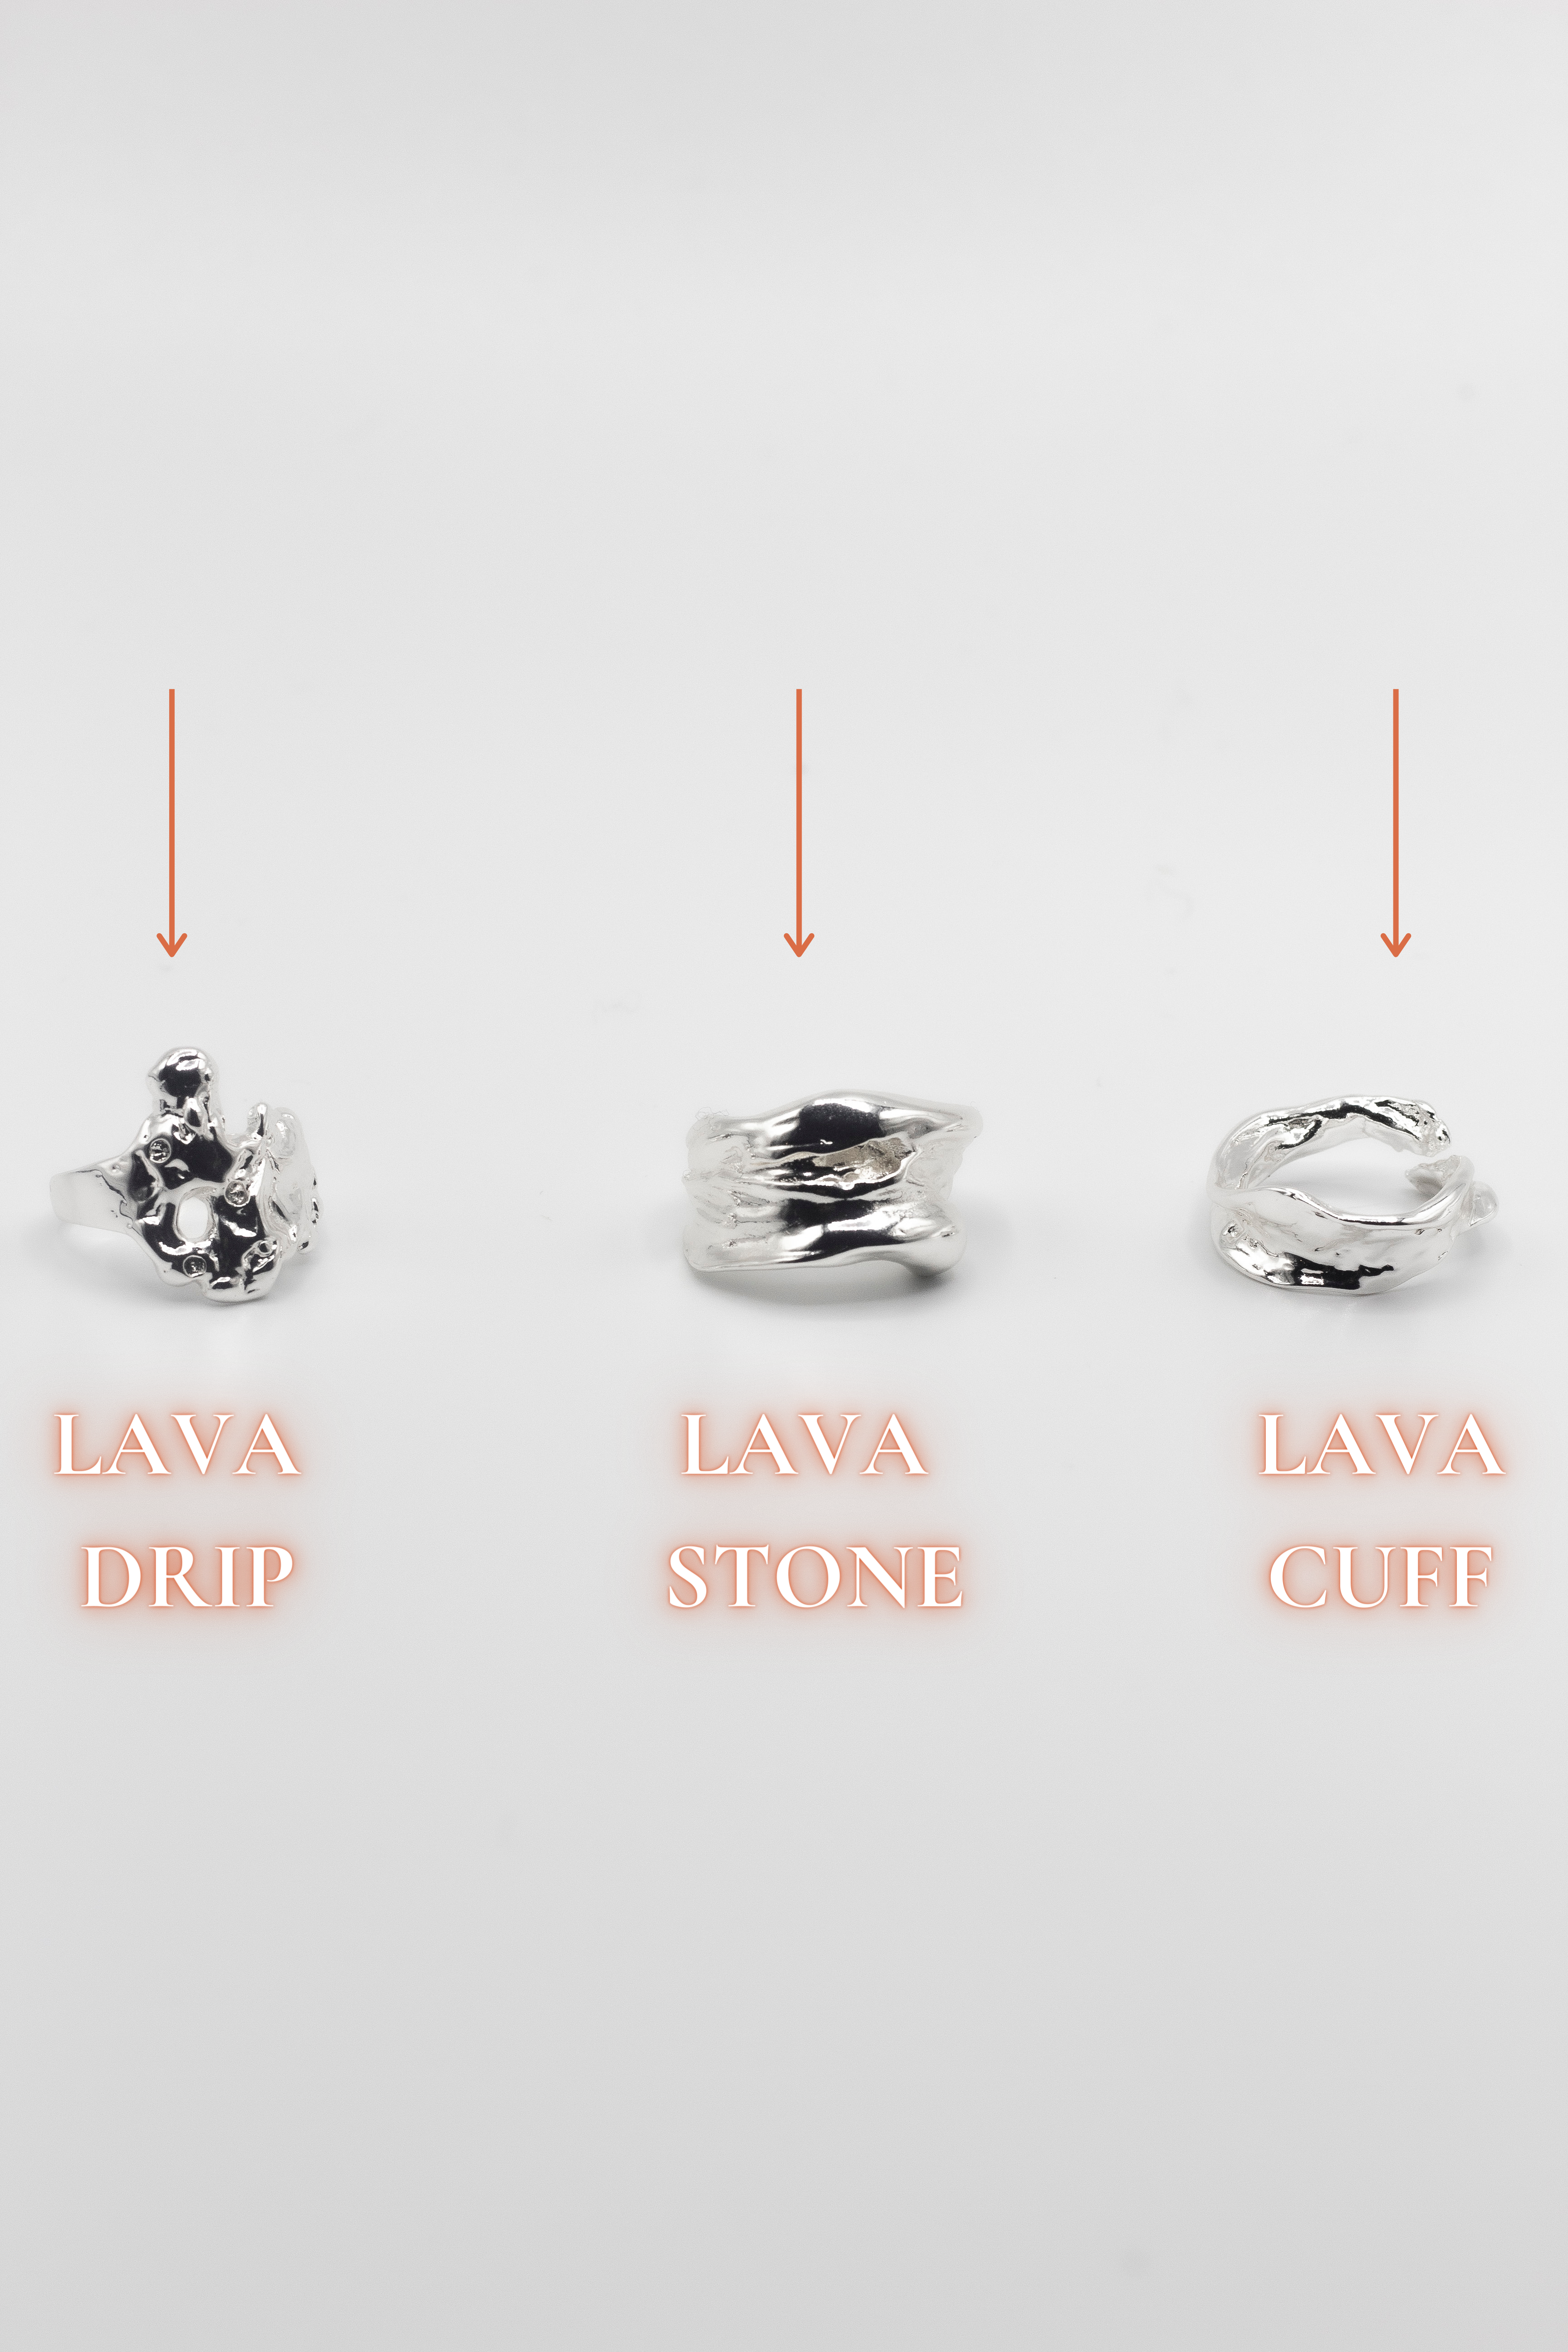 Three 18k silver molten rings placed side-by-side. Ella Lava Ring Trio (Set of 3) by E's Element.